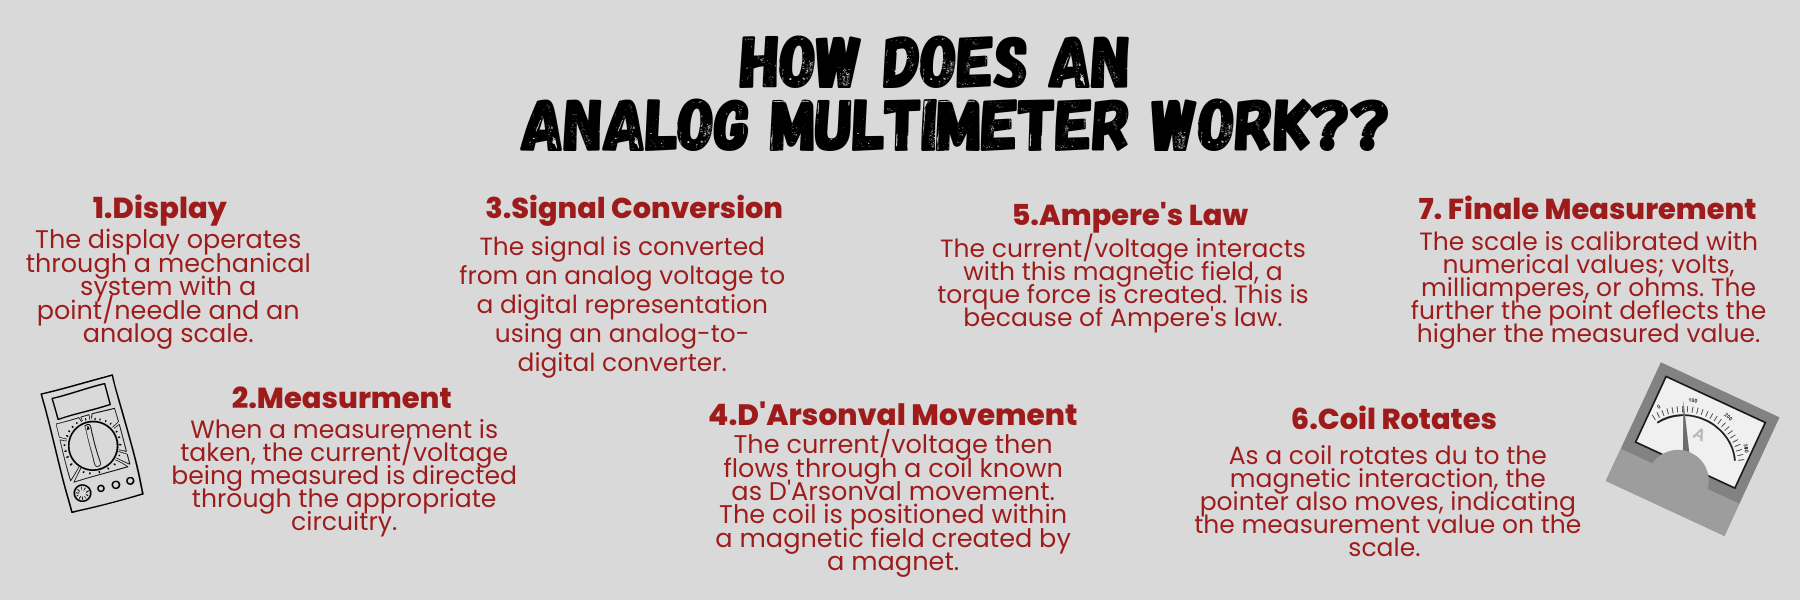 How Does an Analog Multimeter Work